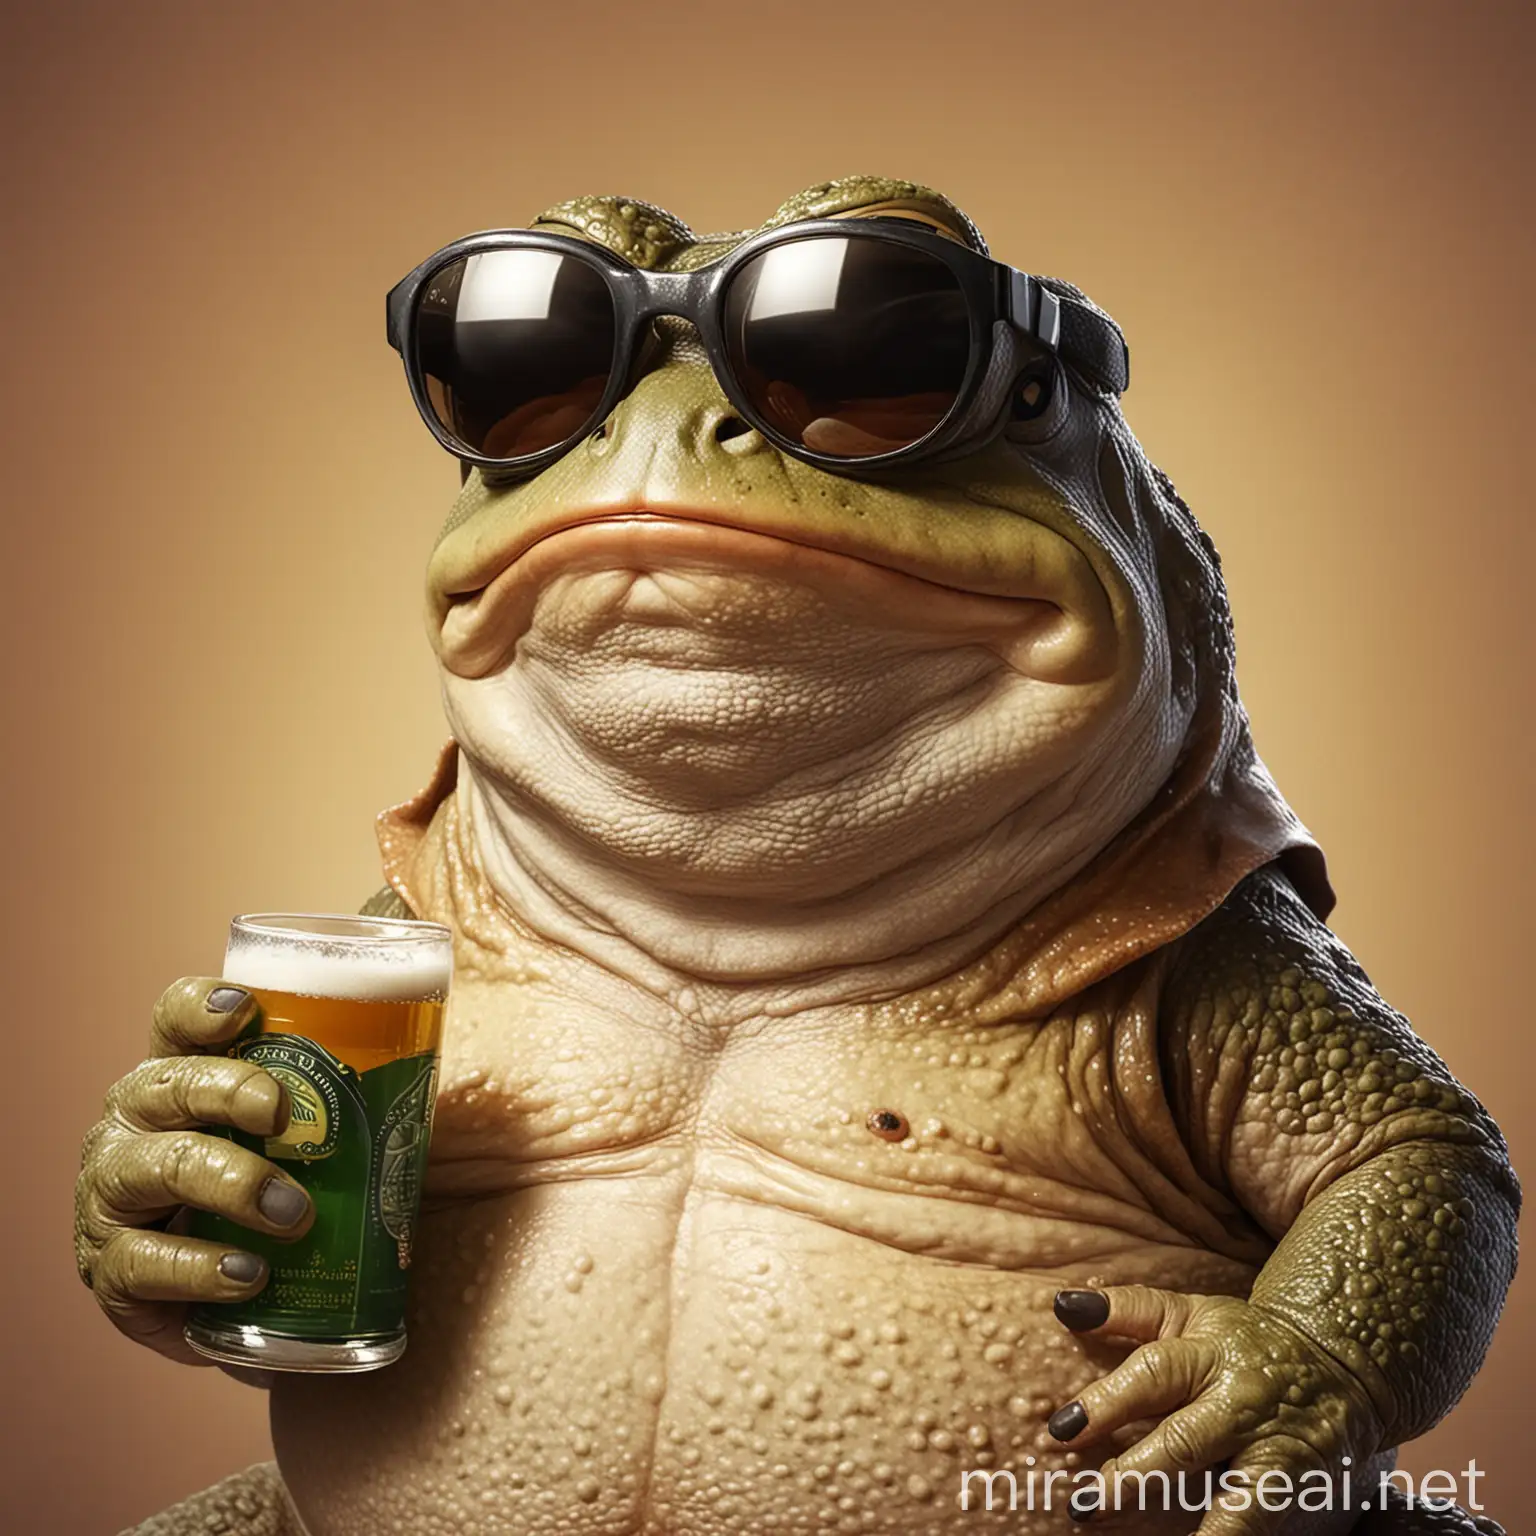 A short, fat, smug toad wearing sunglasses with a beer